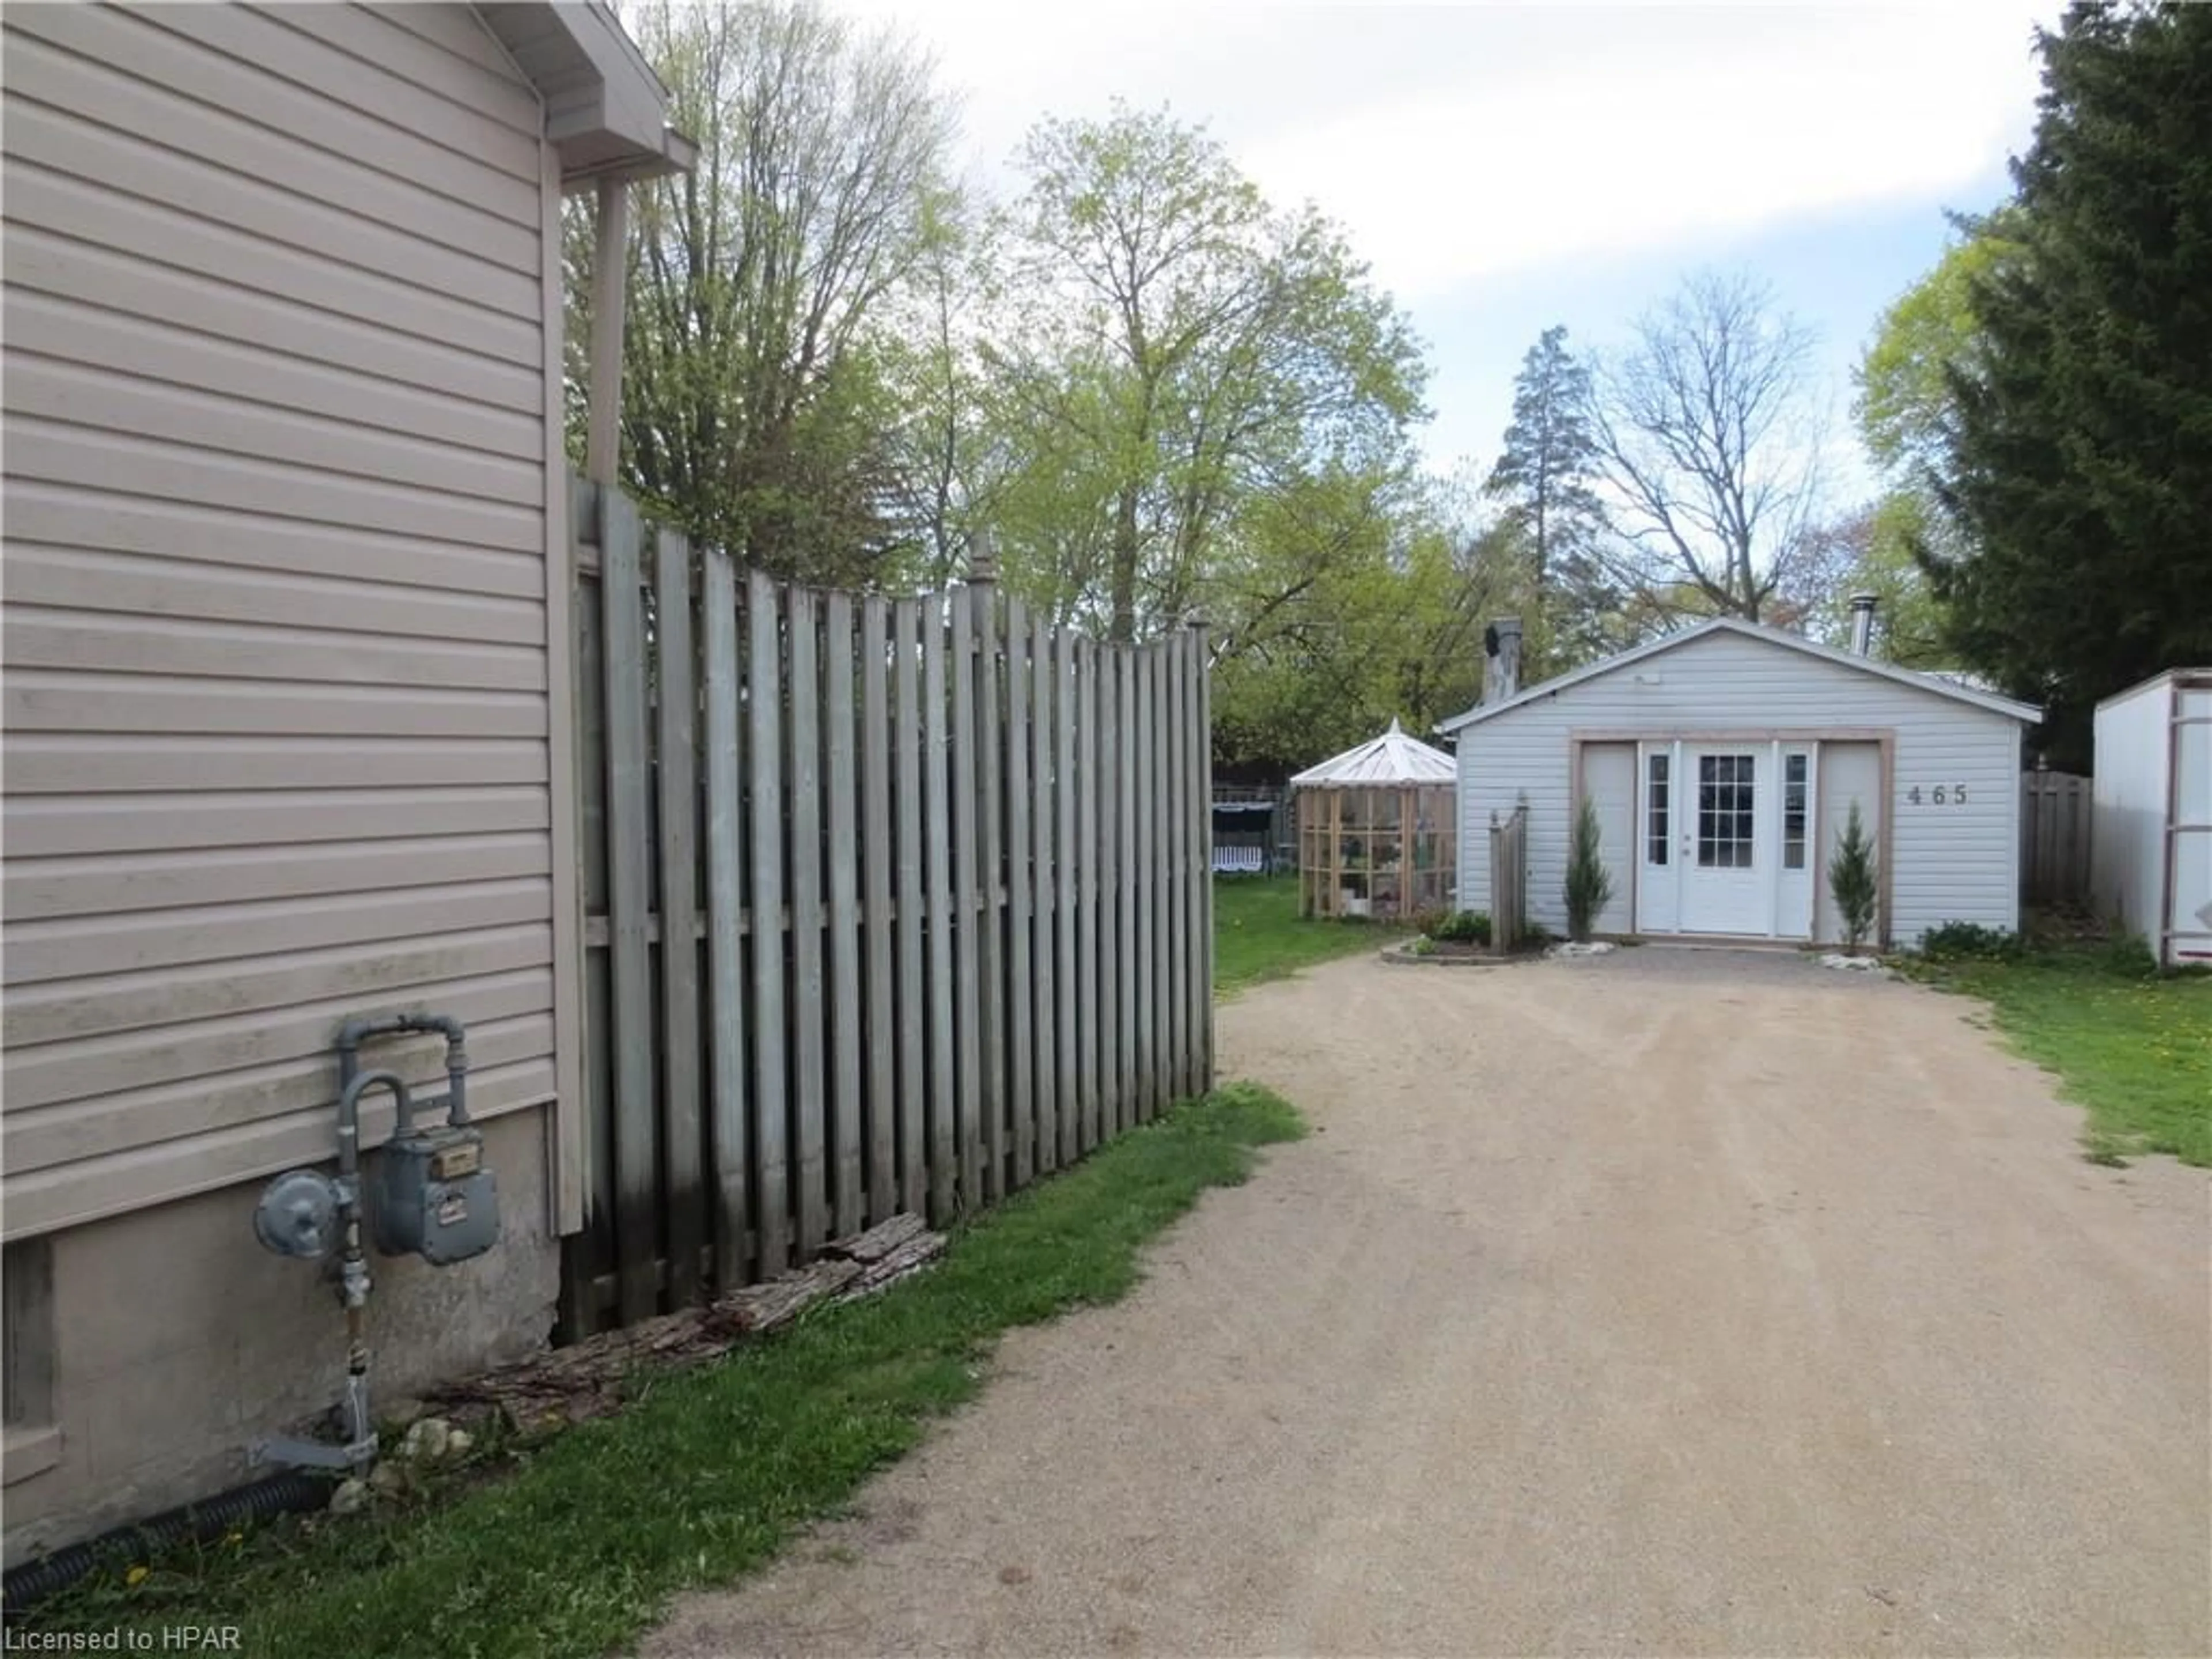 Fenced yard for 465 Queen St, Palmerston Ontario N0G 2P0